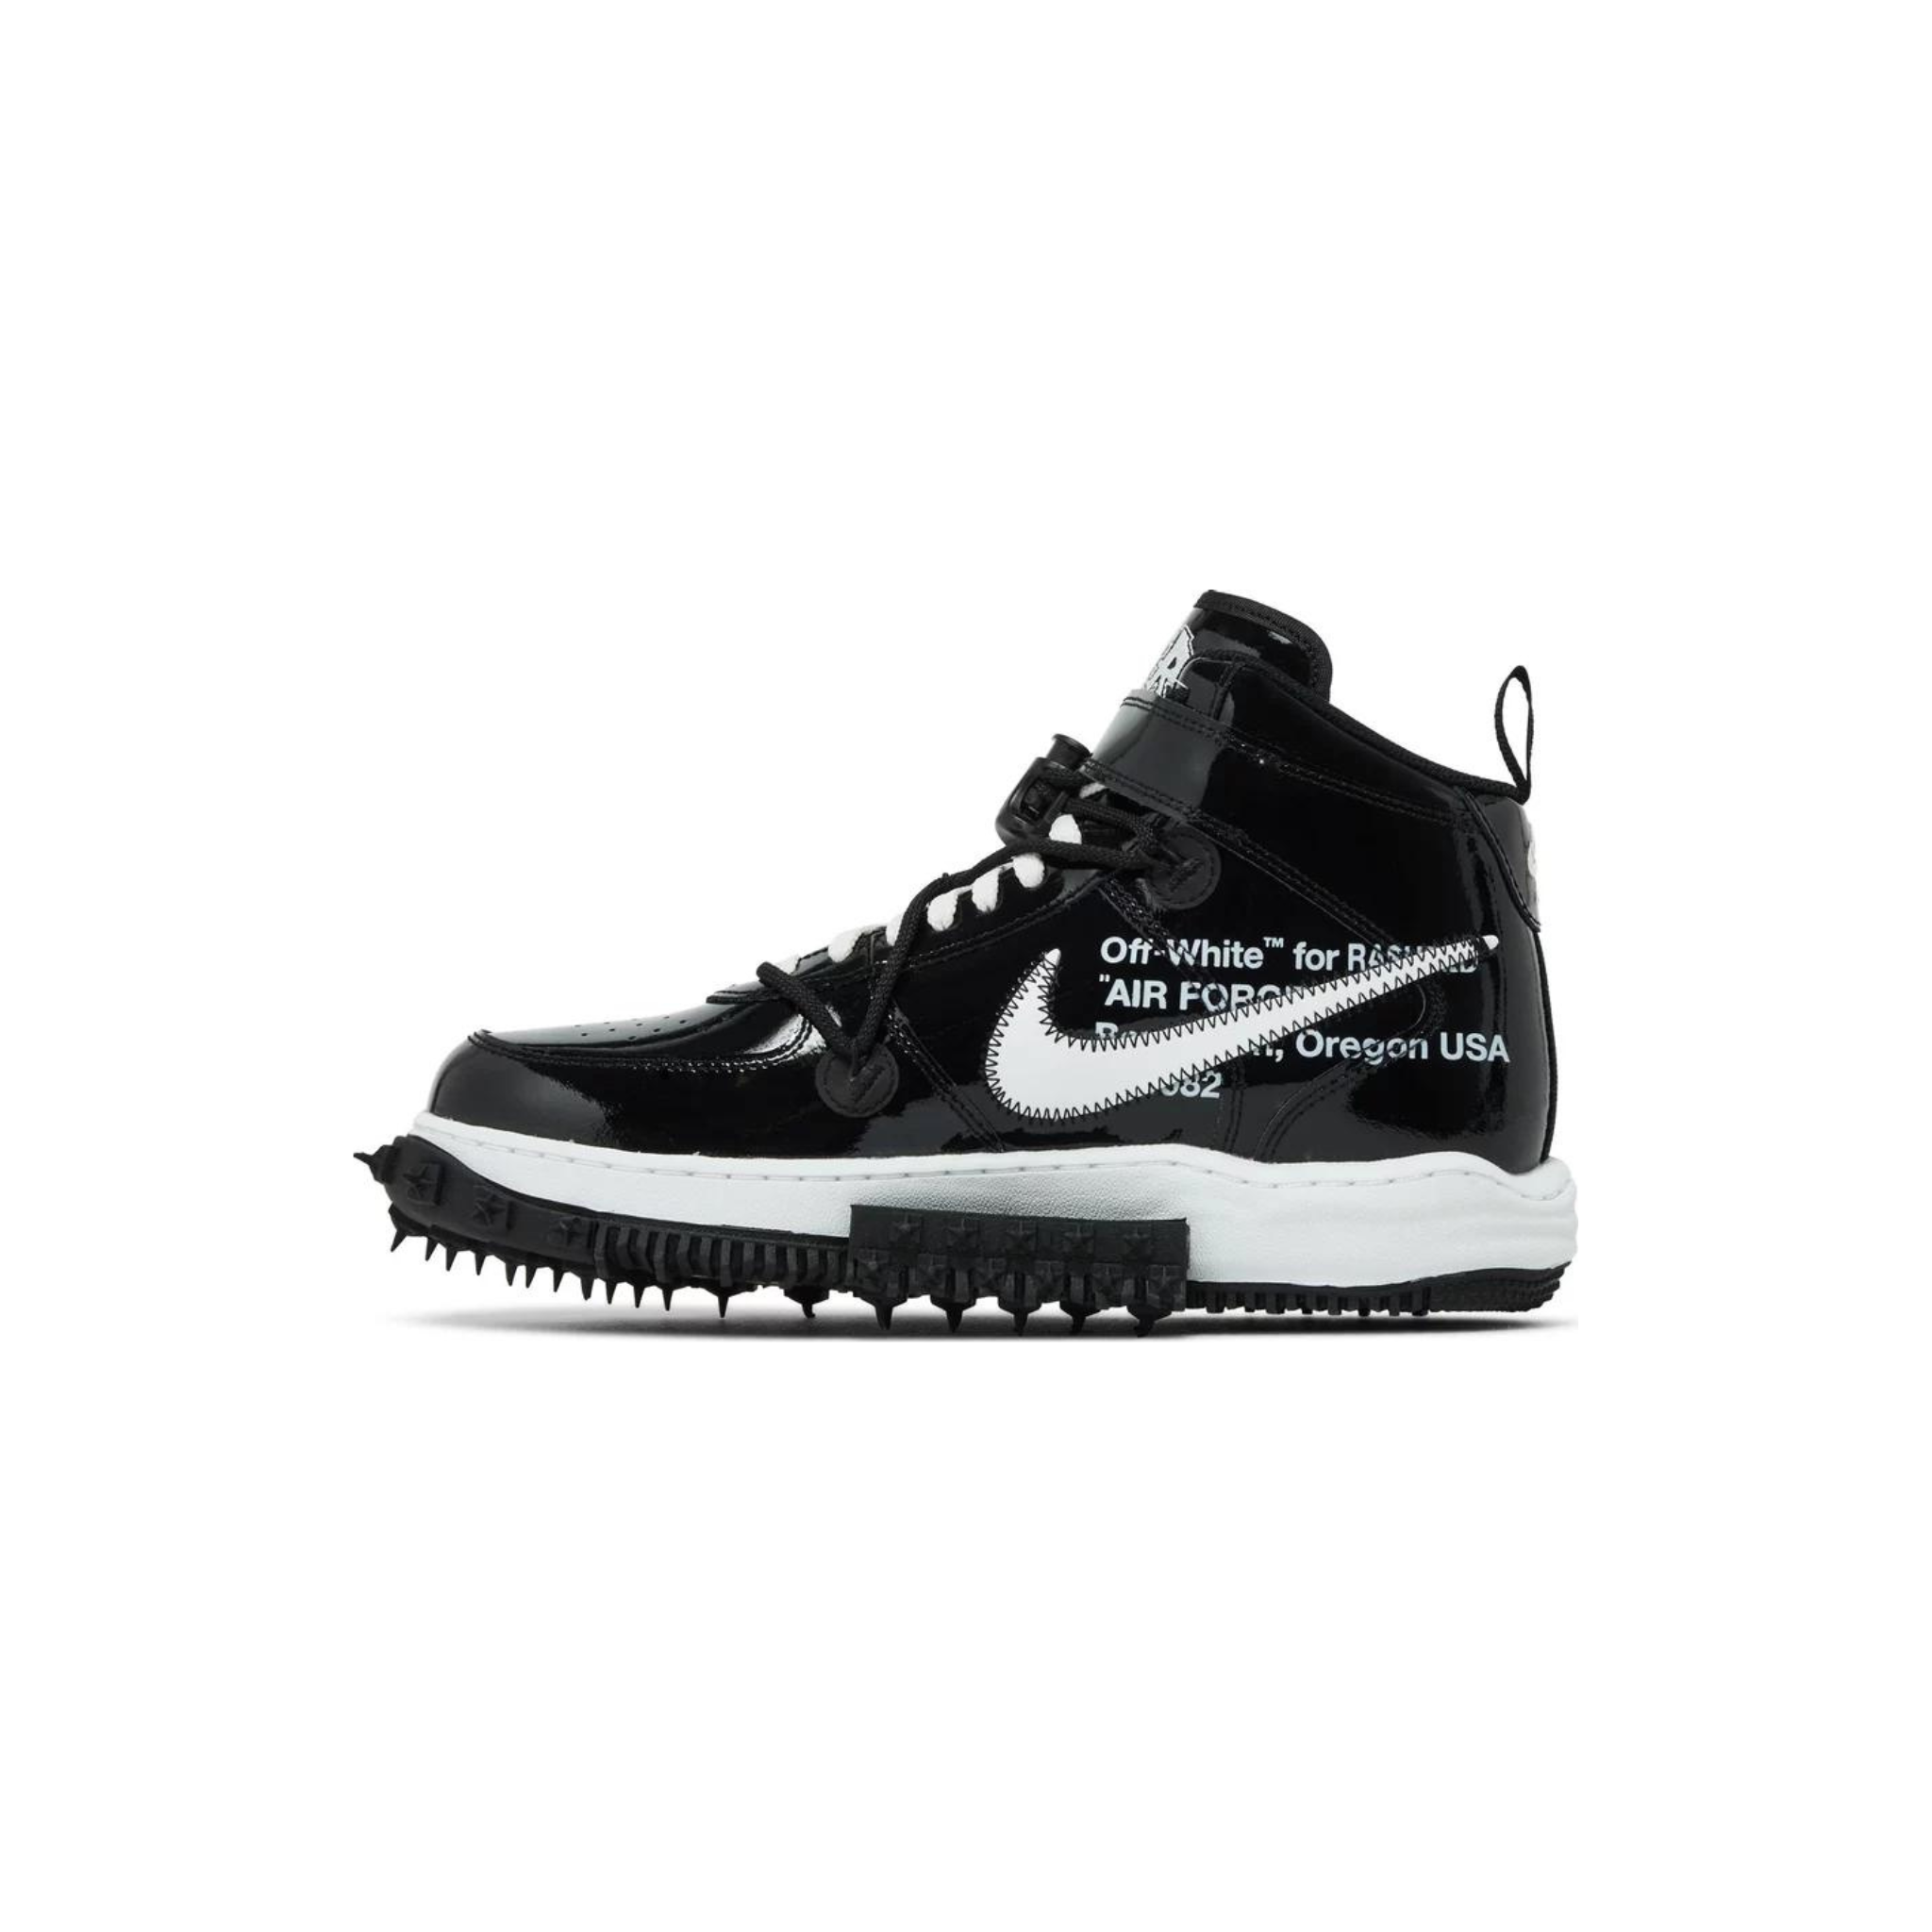 Nike Air Force 1 Mid SP Off-White Sheed